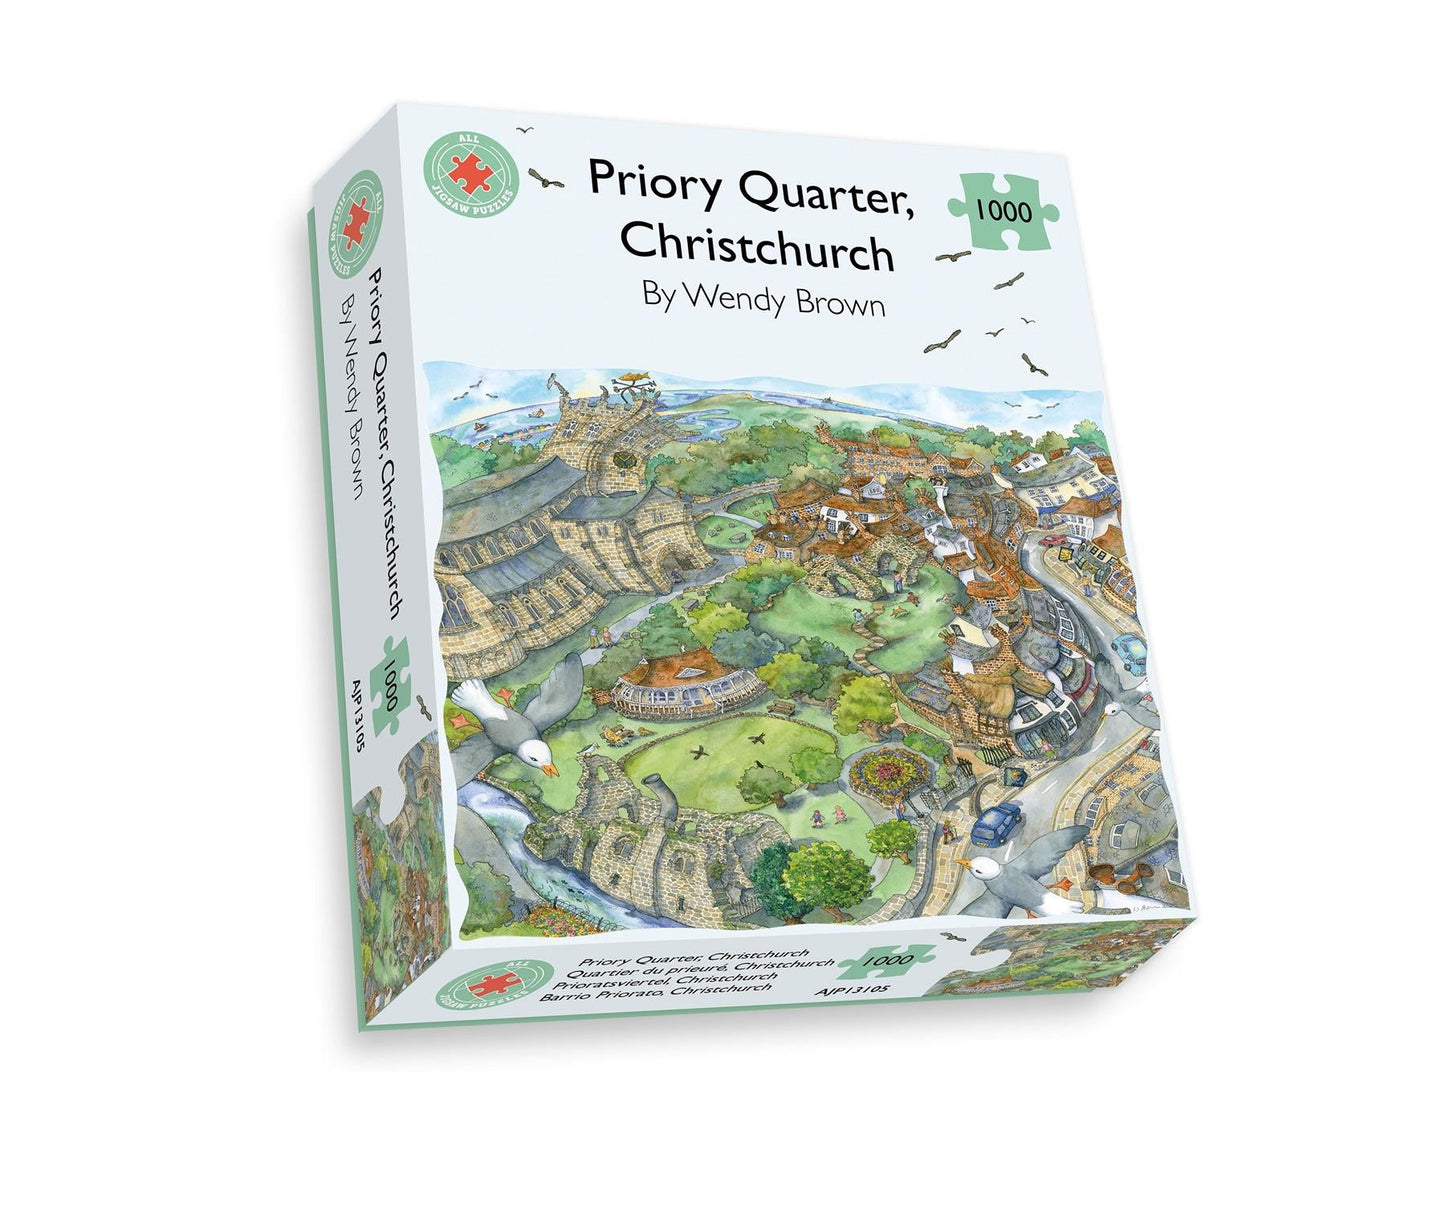 Ancient Christchurch 500 or 1000 Piece Jigsaw Puzzle